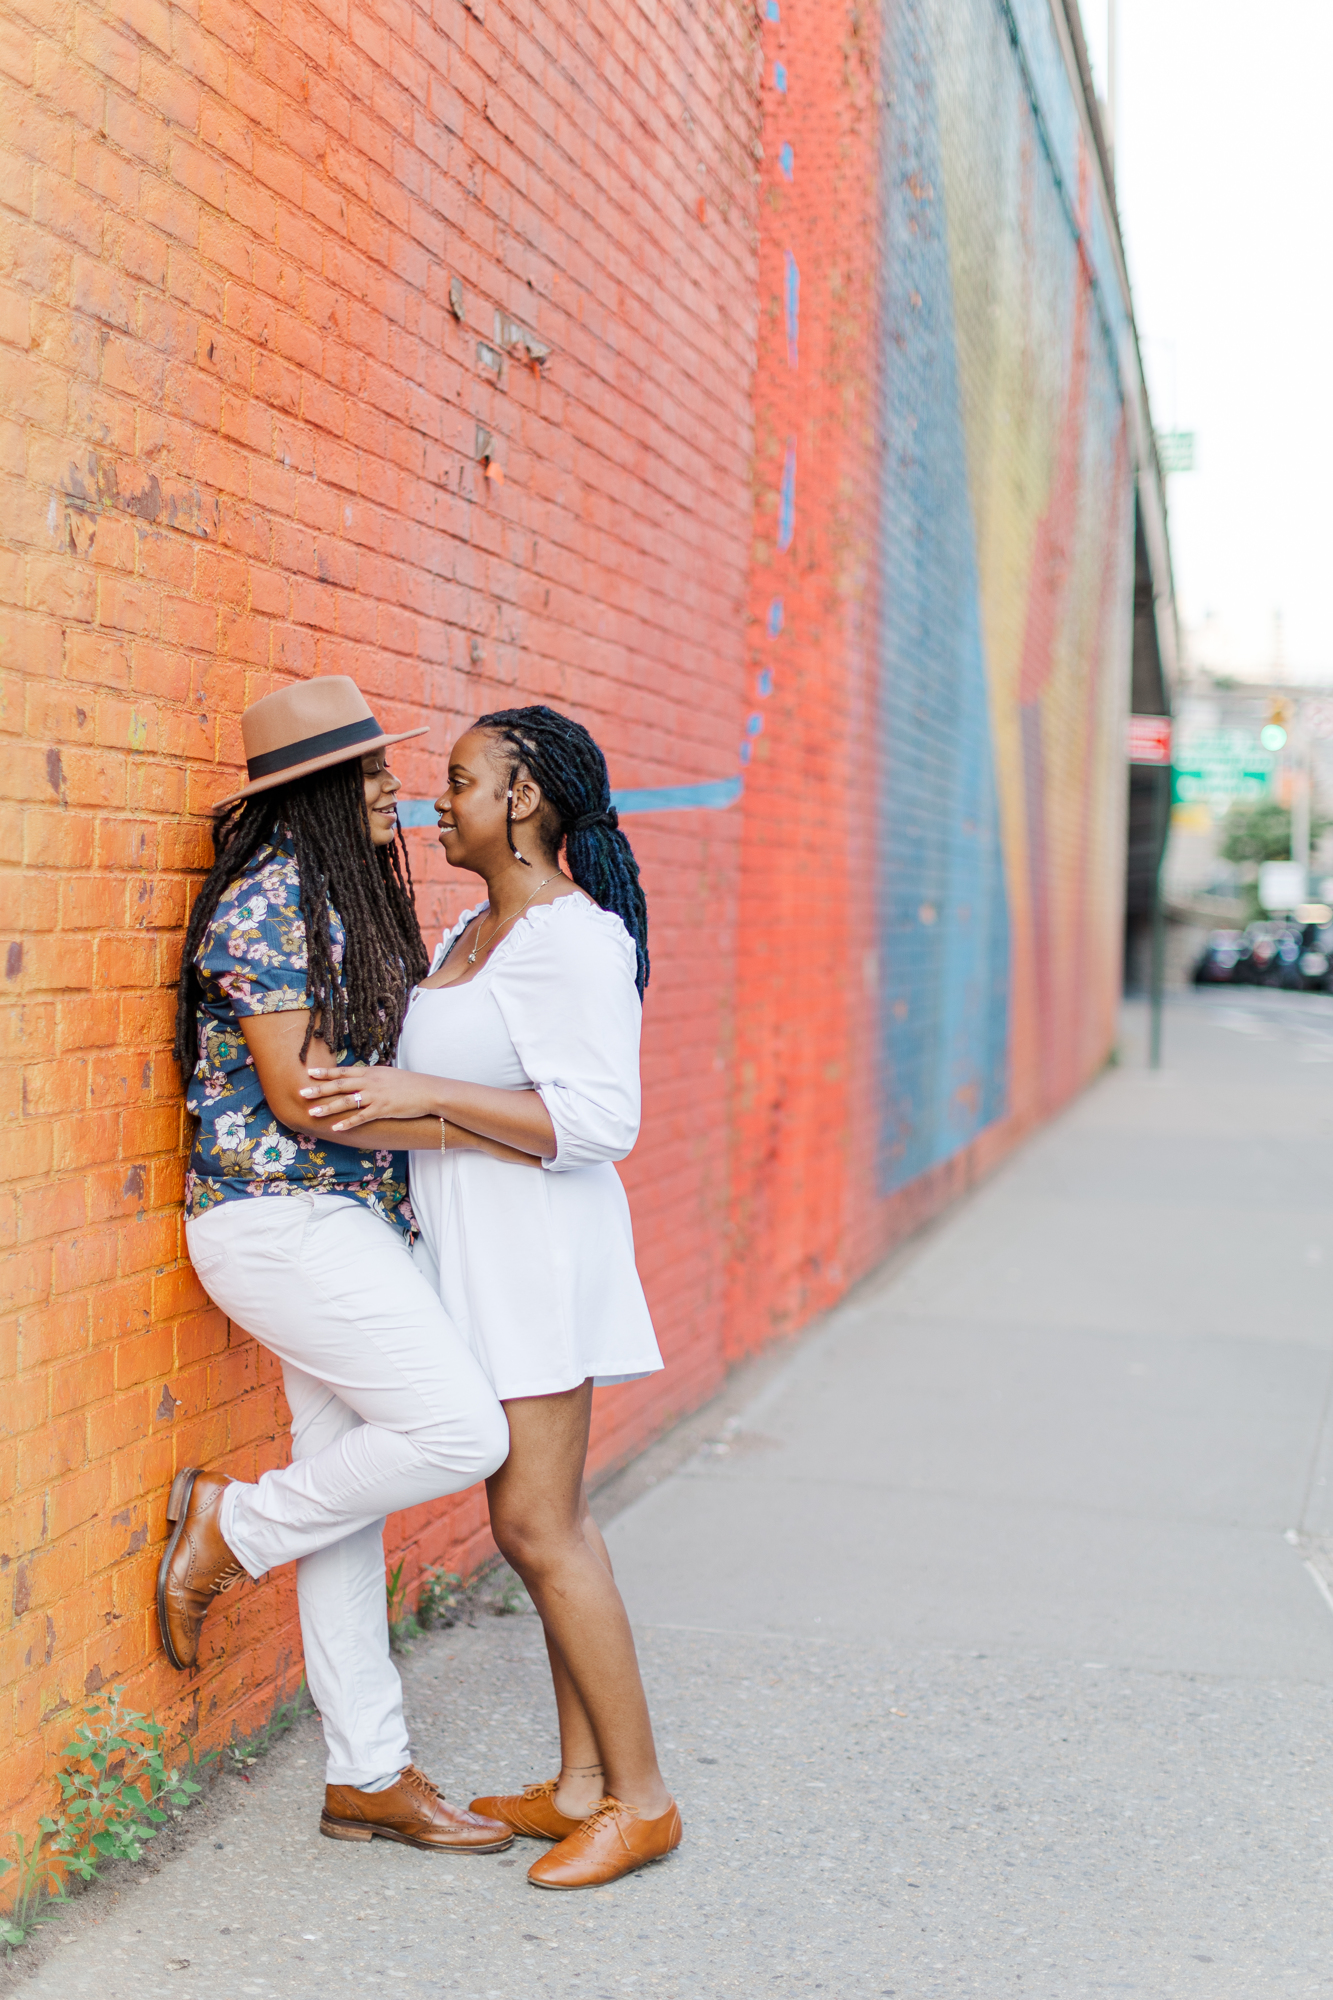 Dreamy Summer Engagement Photography in DUMBO